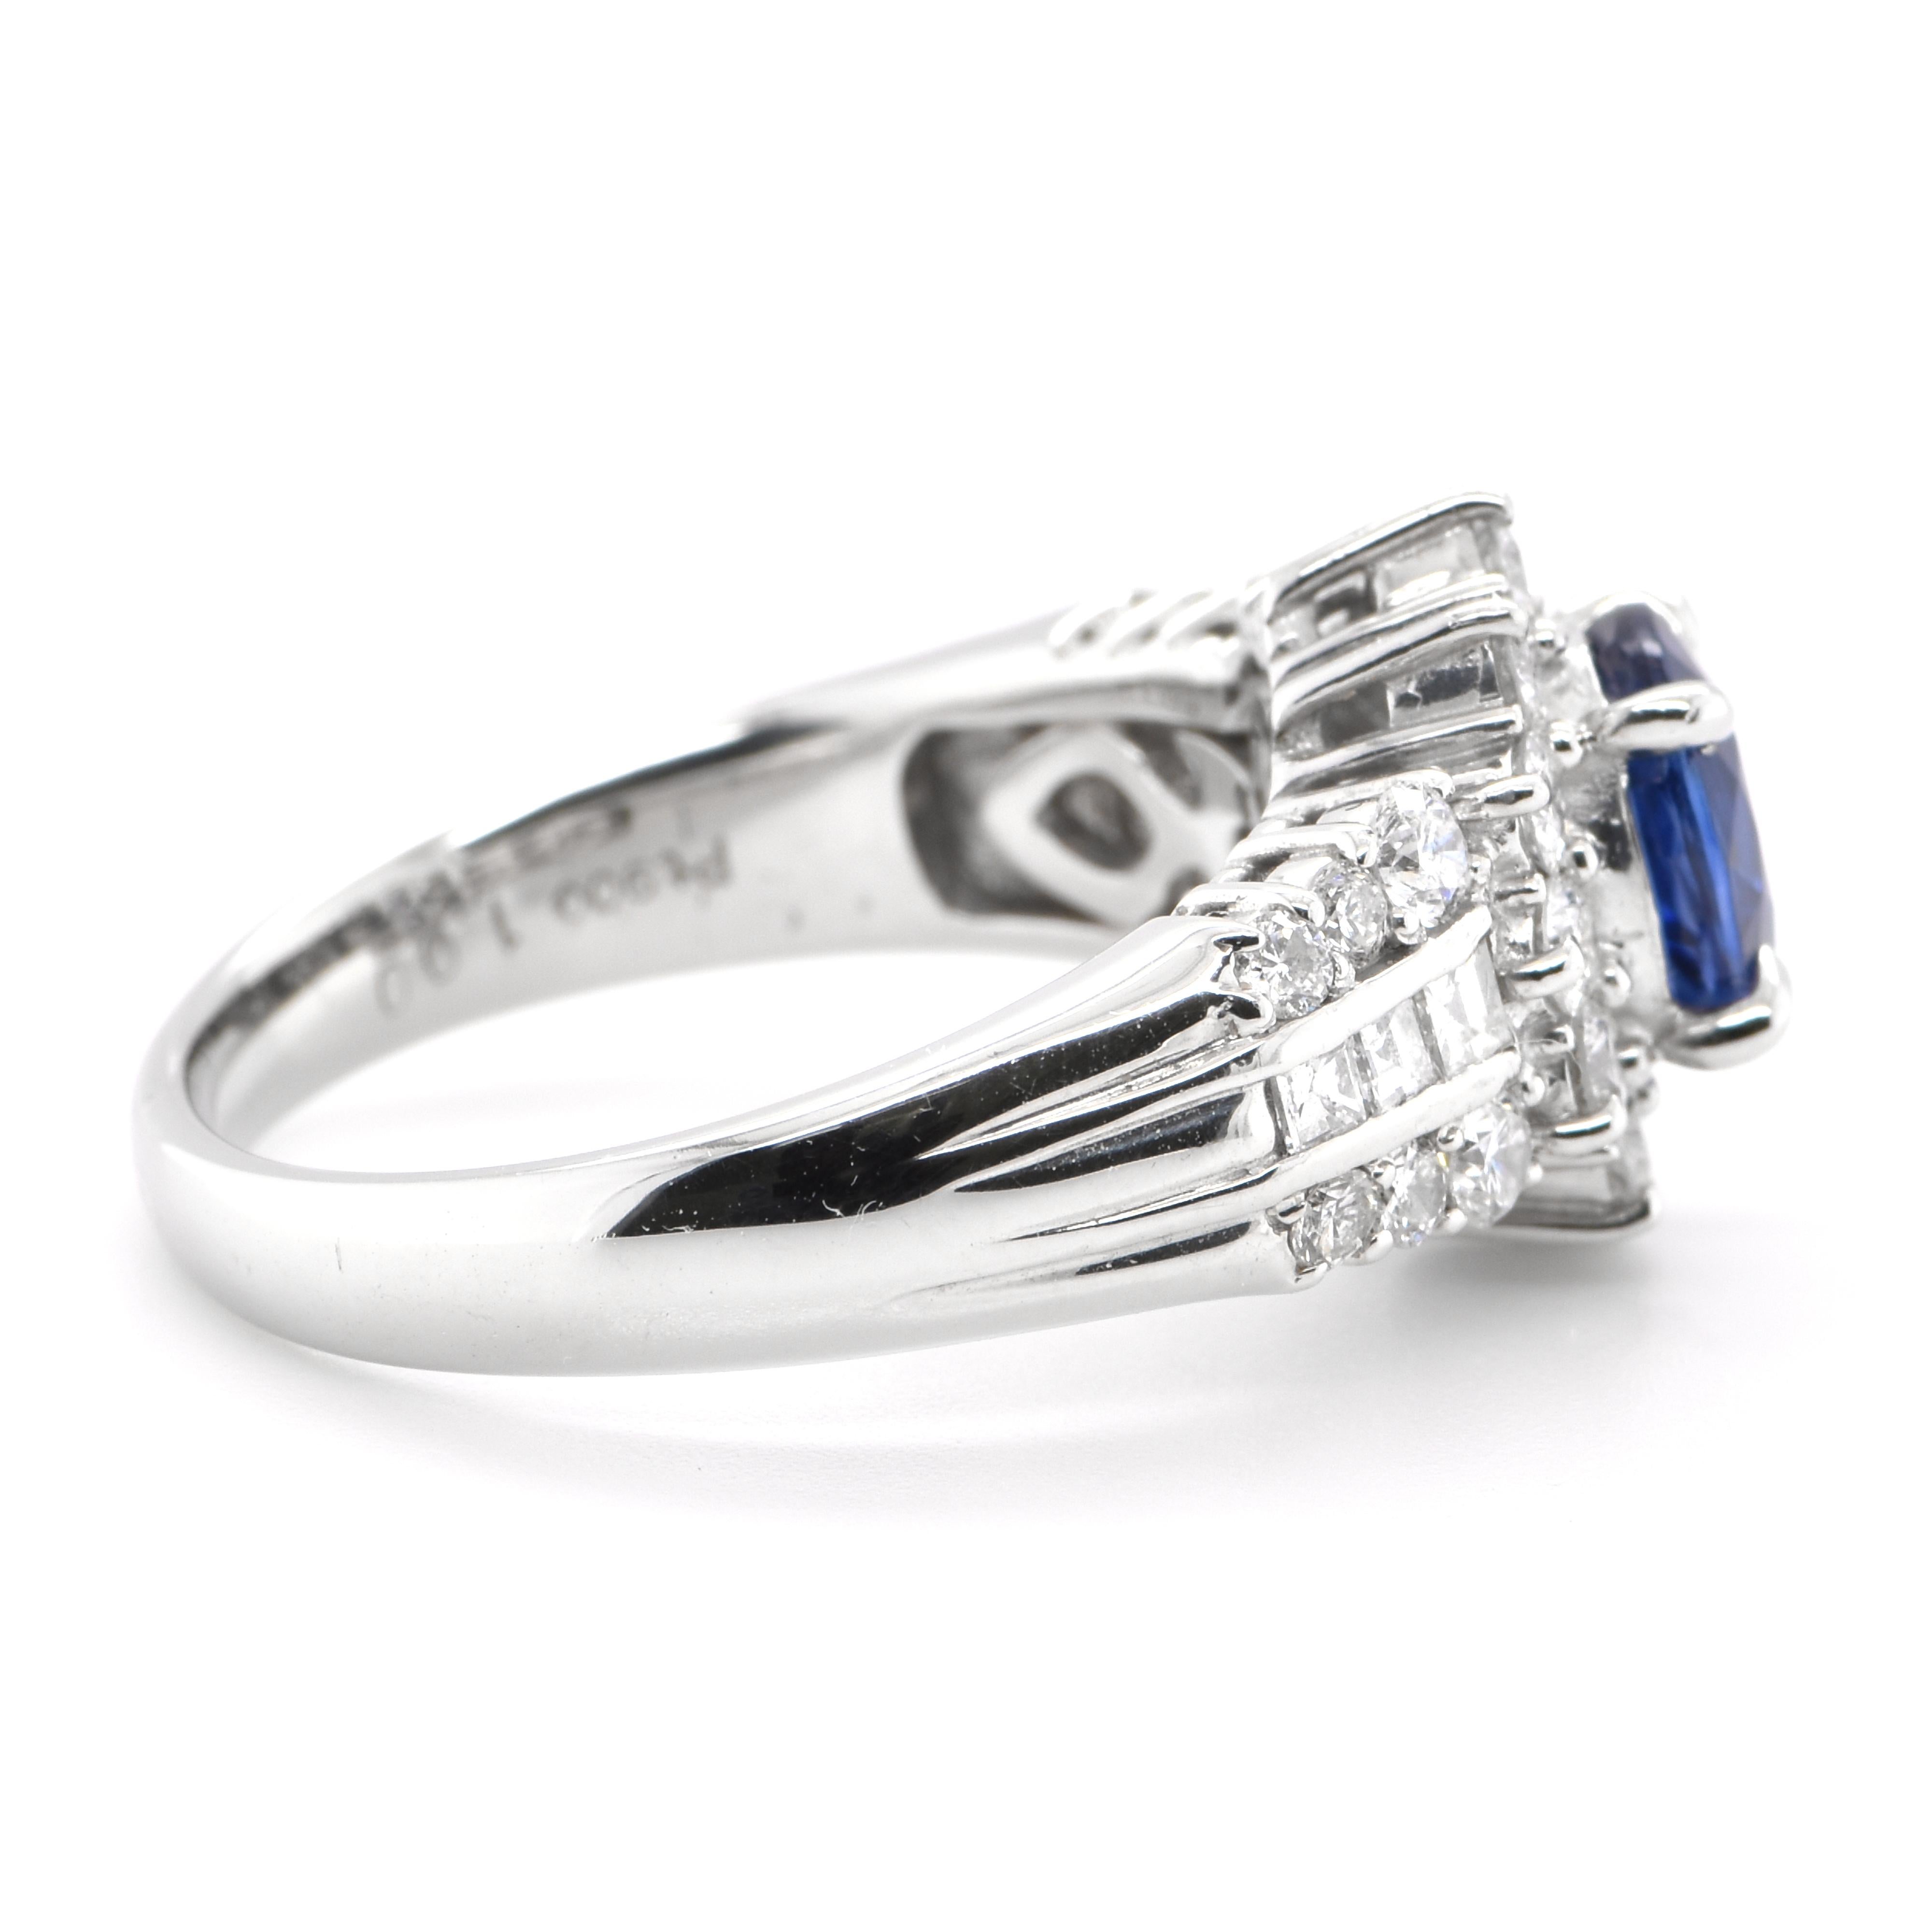 Oval Cut 1.64 Carat Vintage Natural Sapphire and Diamond Ring Set in Platinum